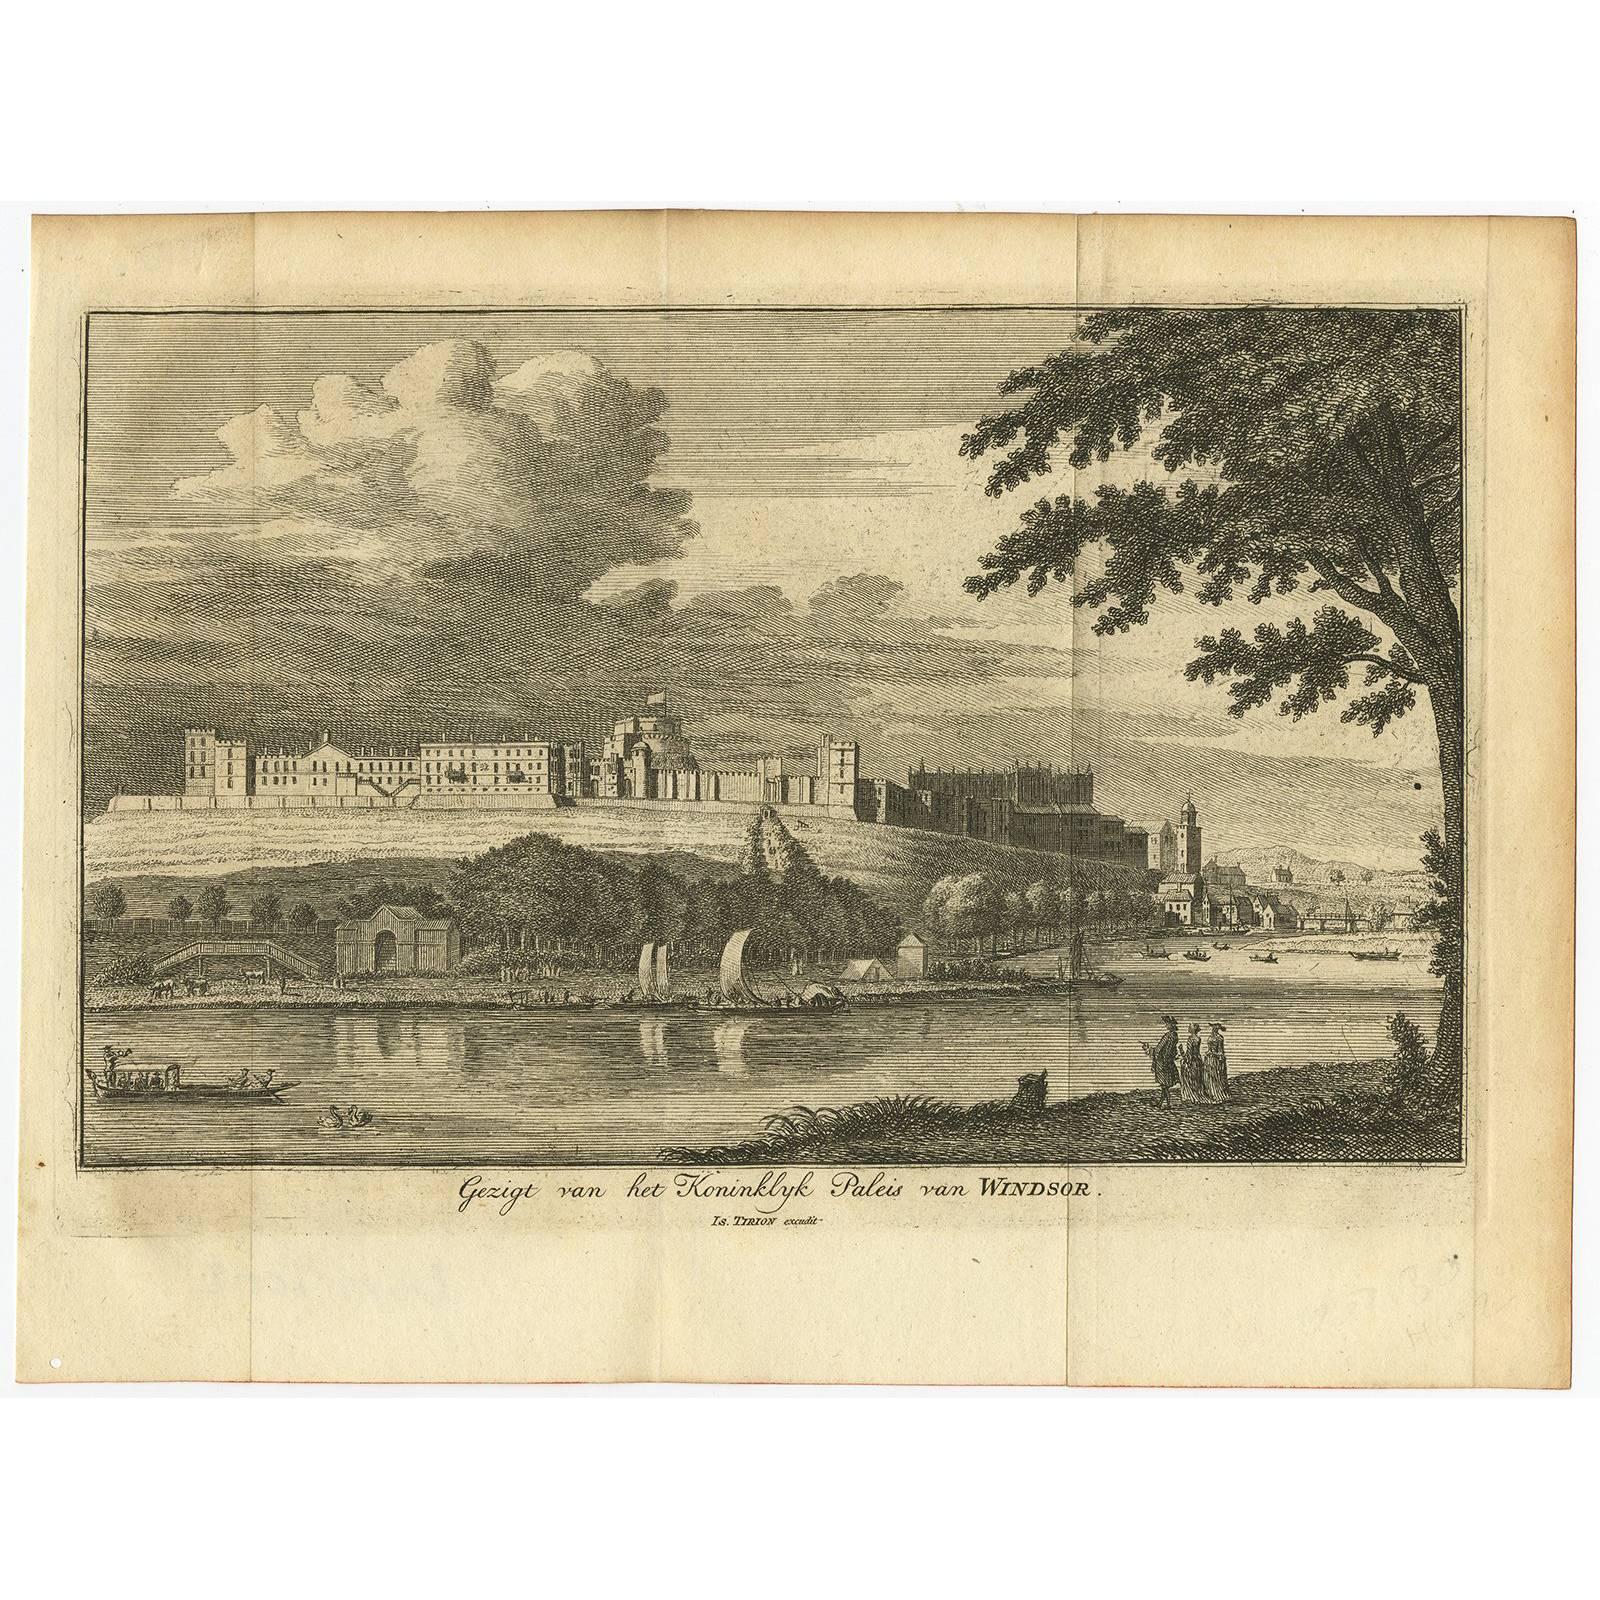 Antique Print with a View of the Royal Palace of Windsor by i. Tirion, 1754